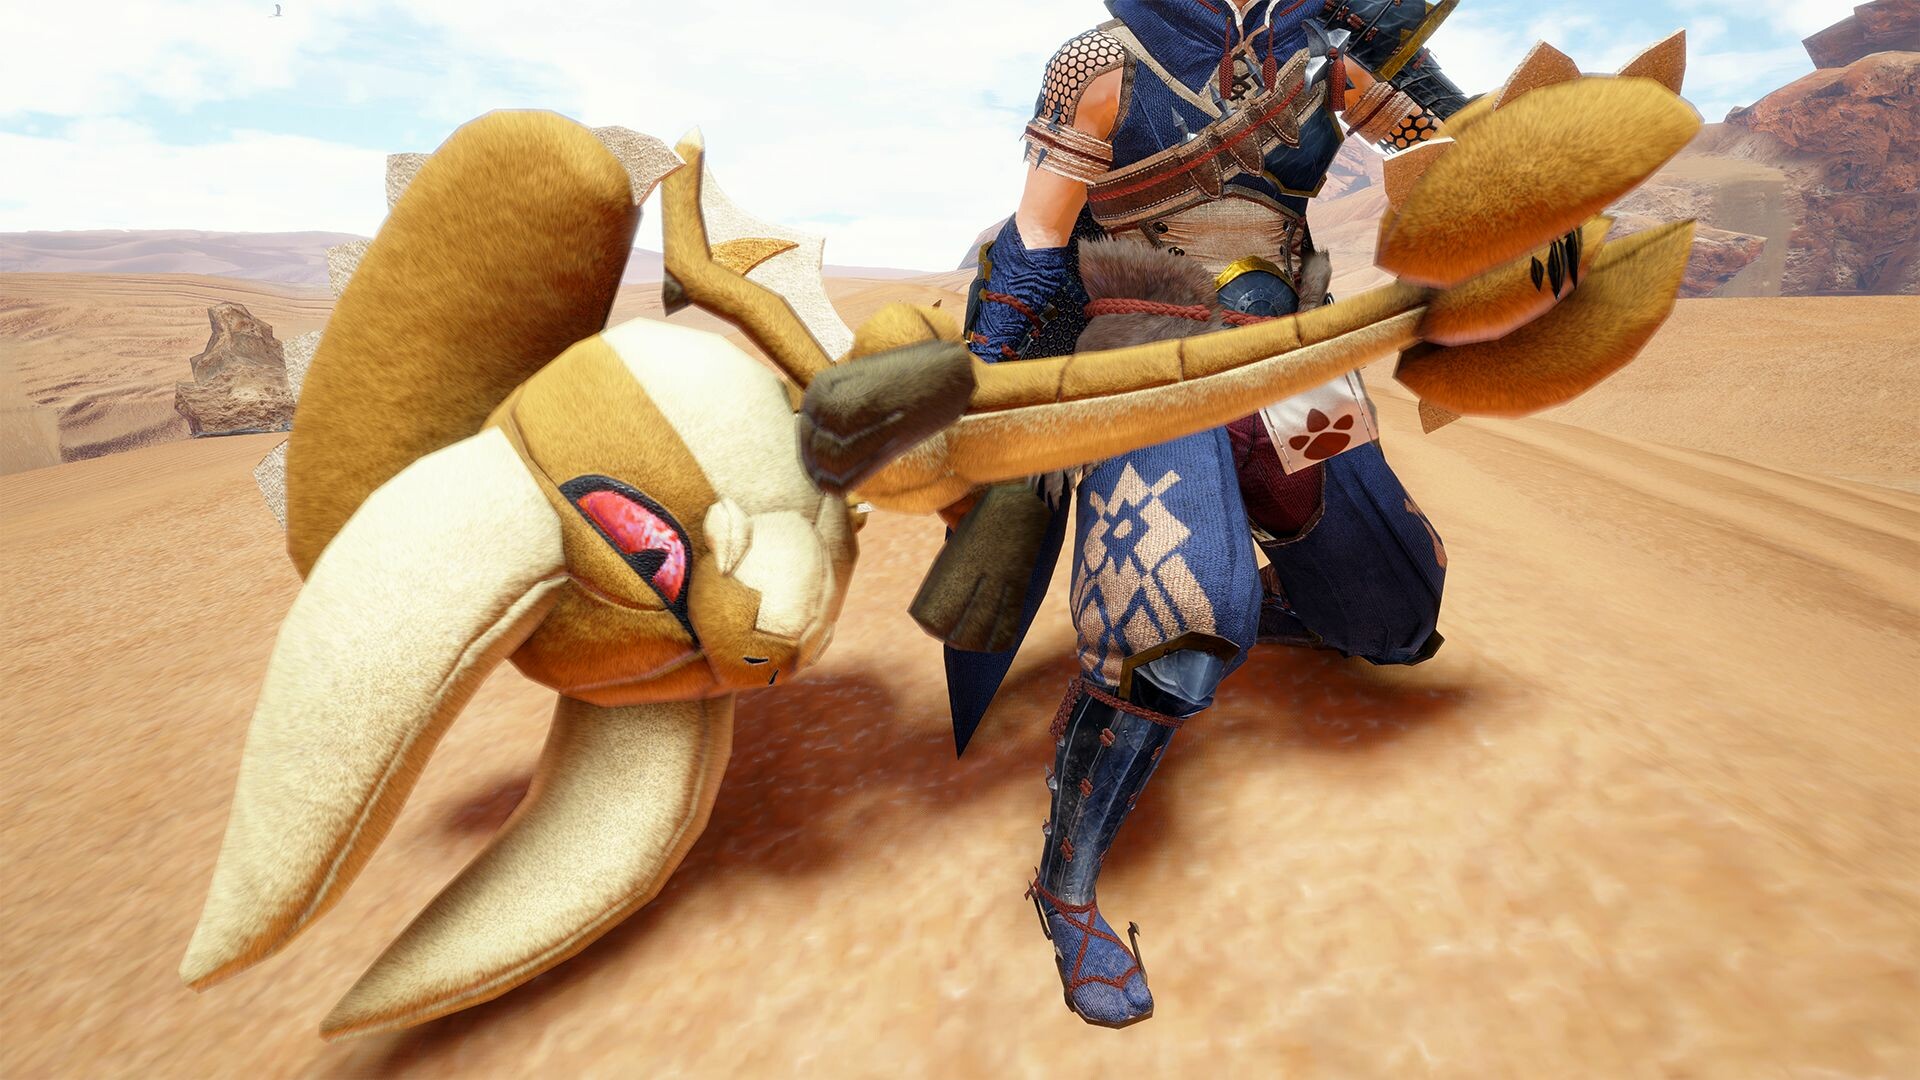 Stuffed Diablos Hunter layered weapon (Hammer) for Nintendo Switch -  Nintendo Official Site